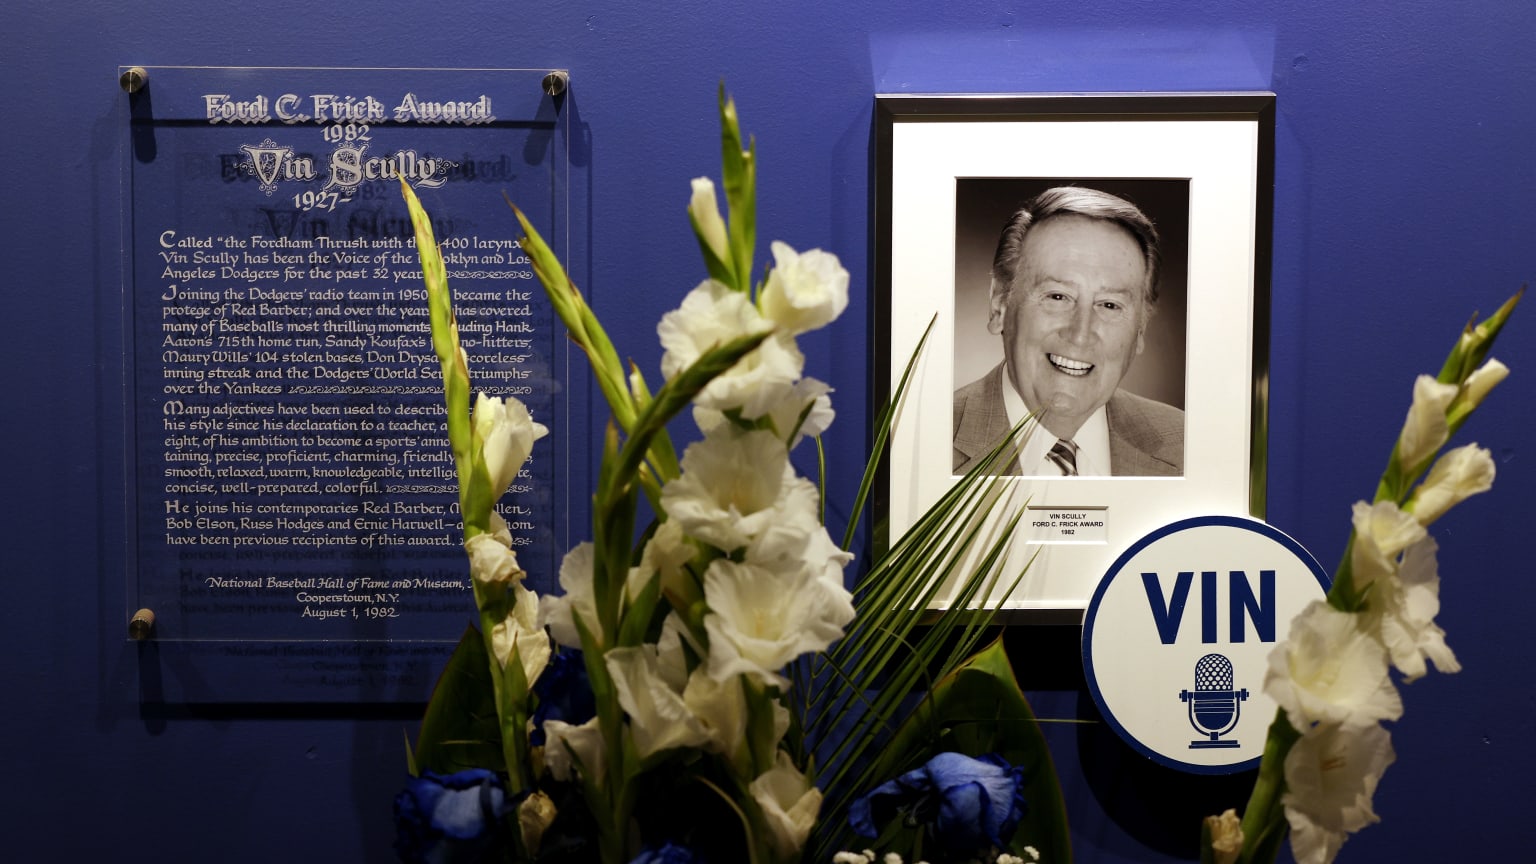 White flowers on display in front of a photograph of Vin Scully next to a plaque denoting Scully's Ford C. Frick Award recognition